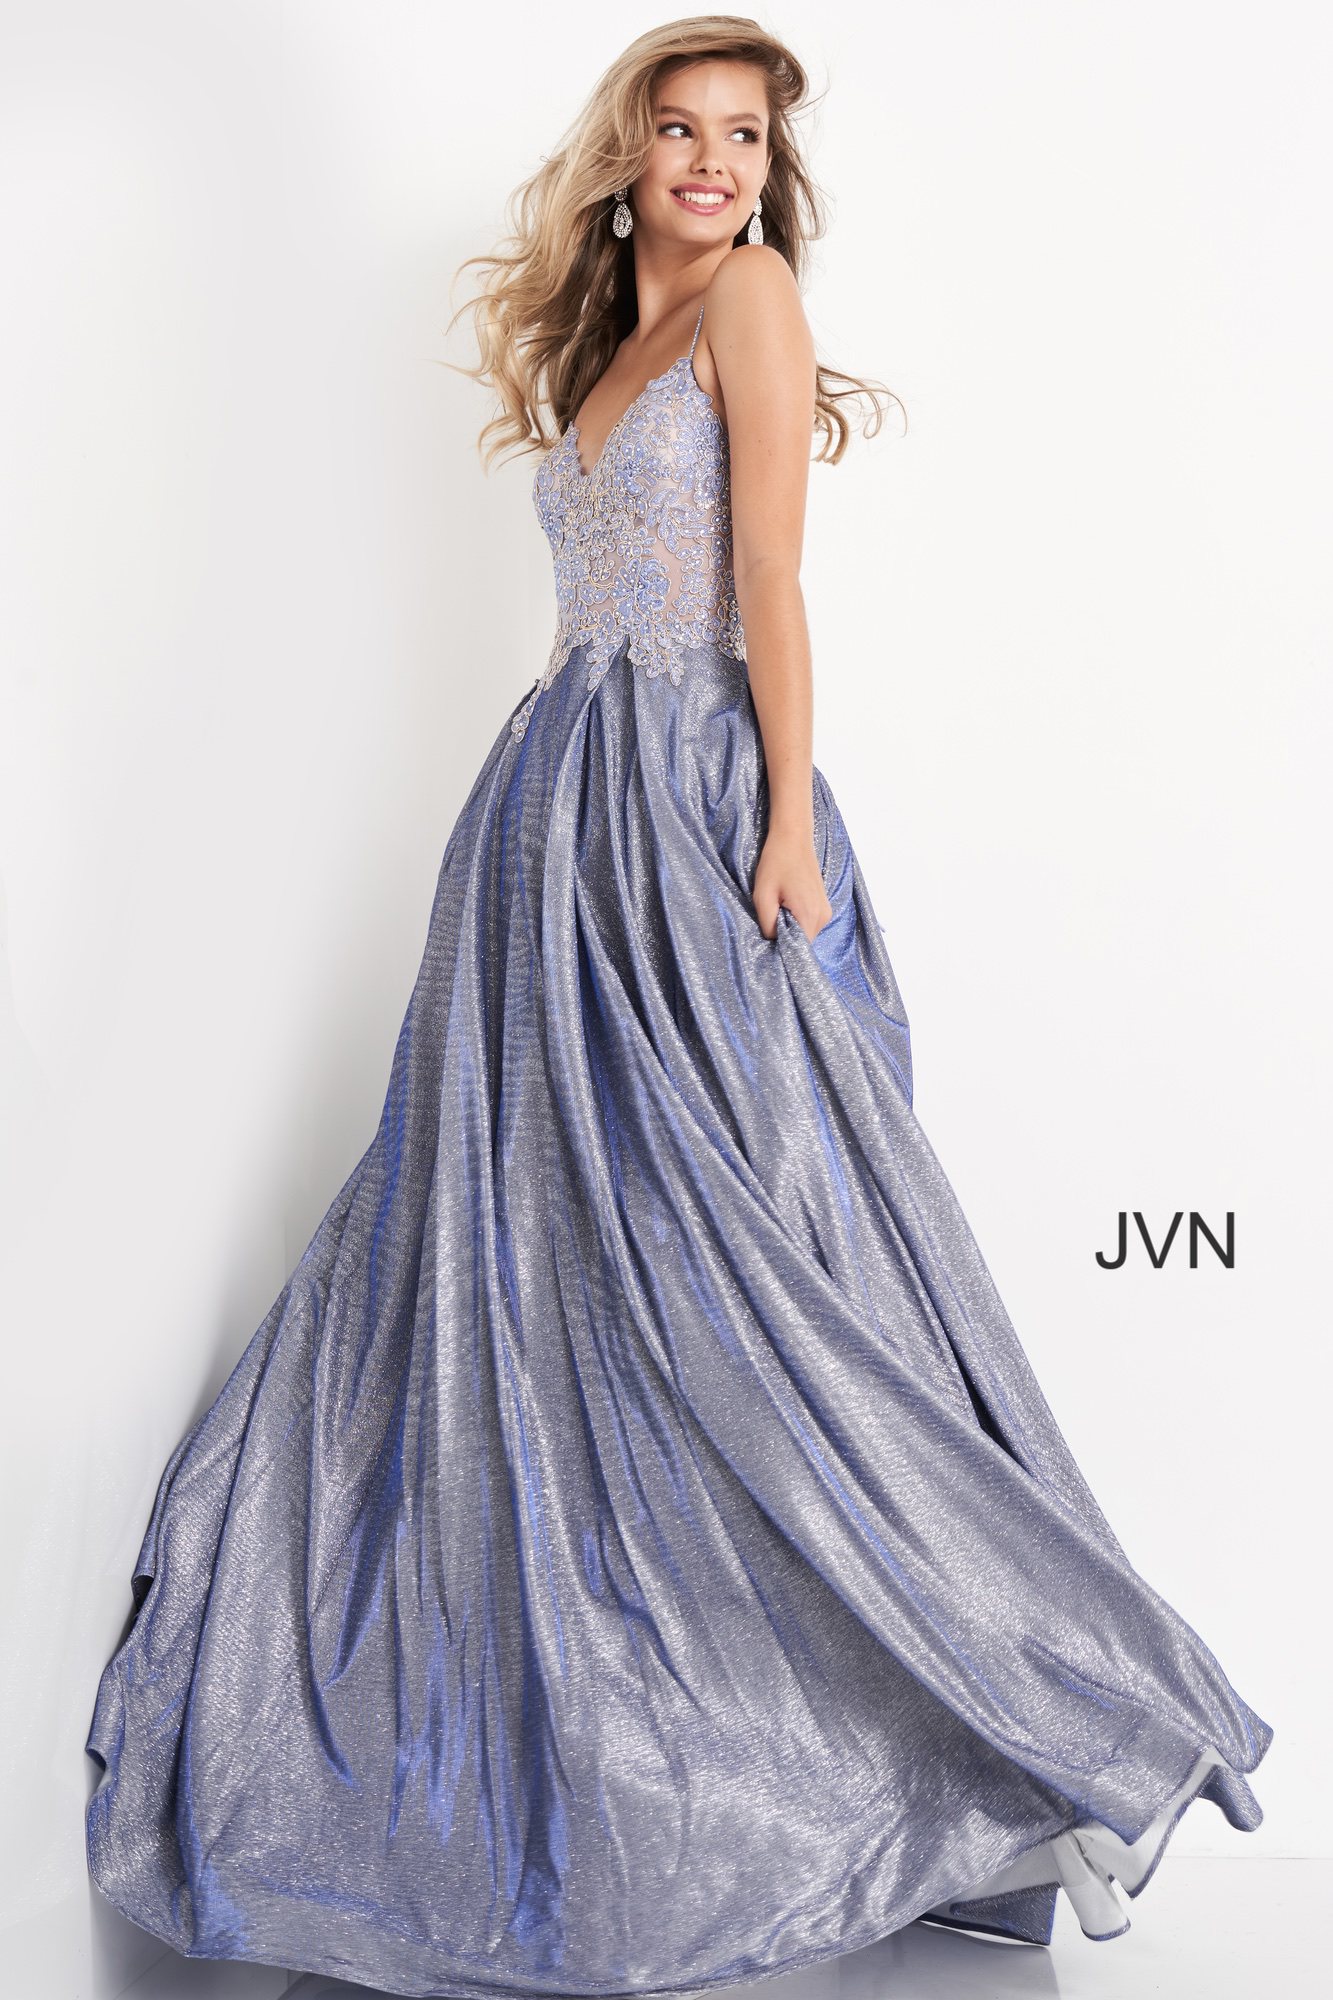 JVN2206 Dress | Nude Embroidered Floral Bodice Prom Ballgown